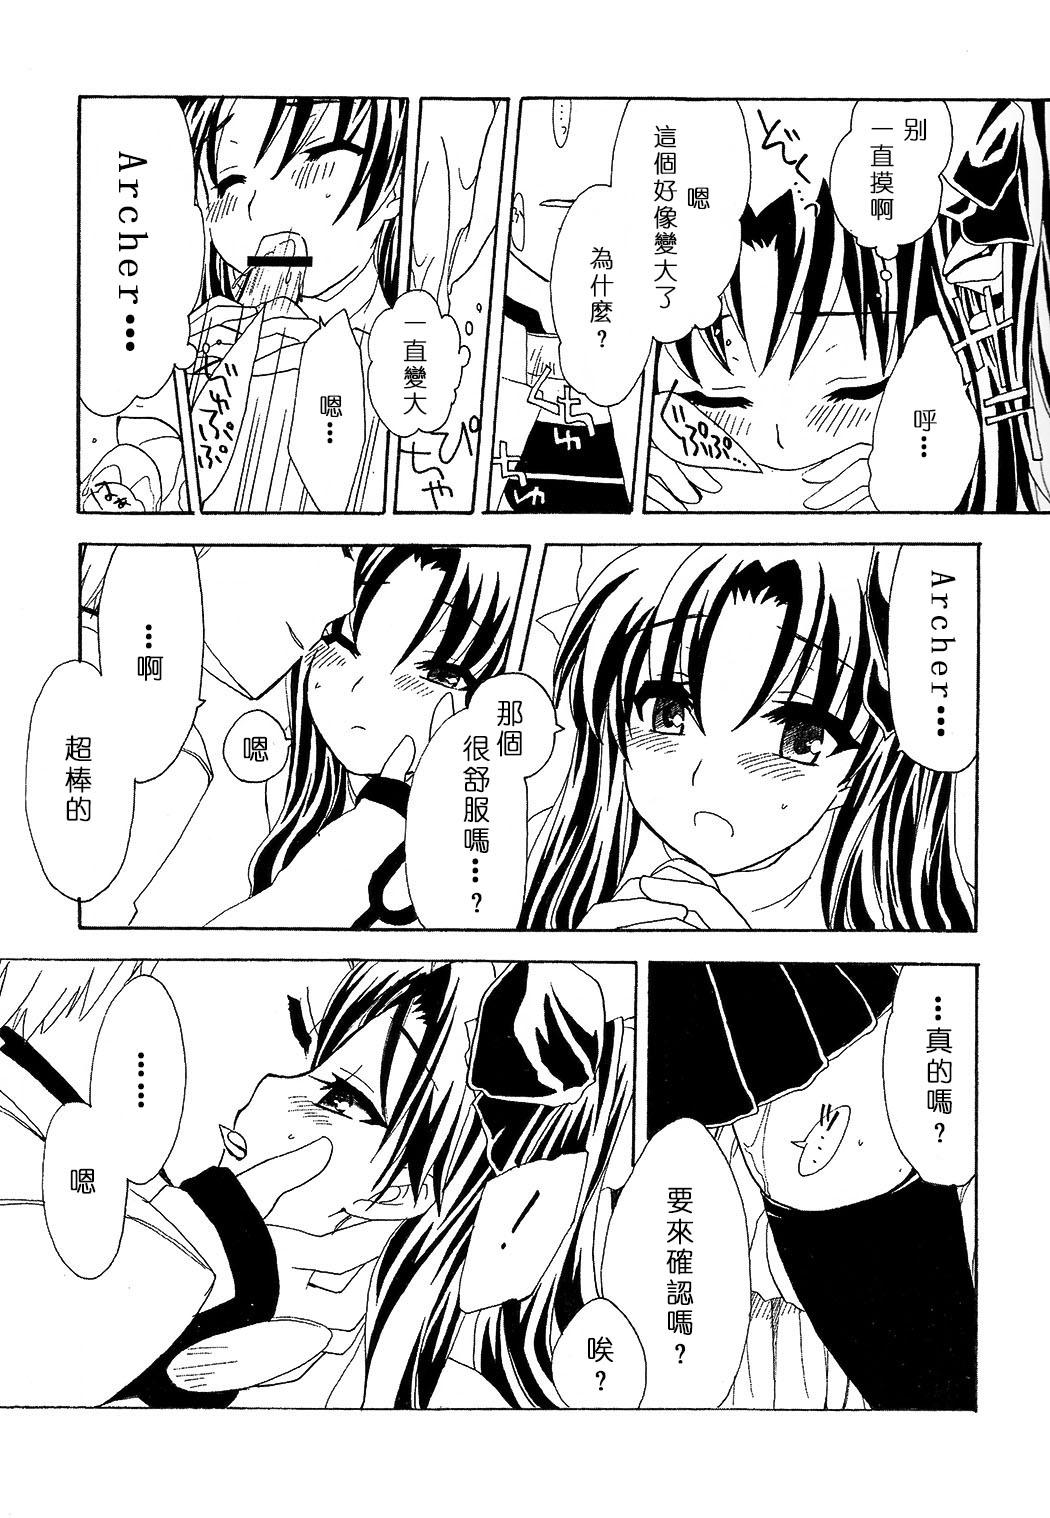 Mama :ragtime - Fate stay night Lesbos - Page 11